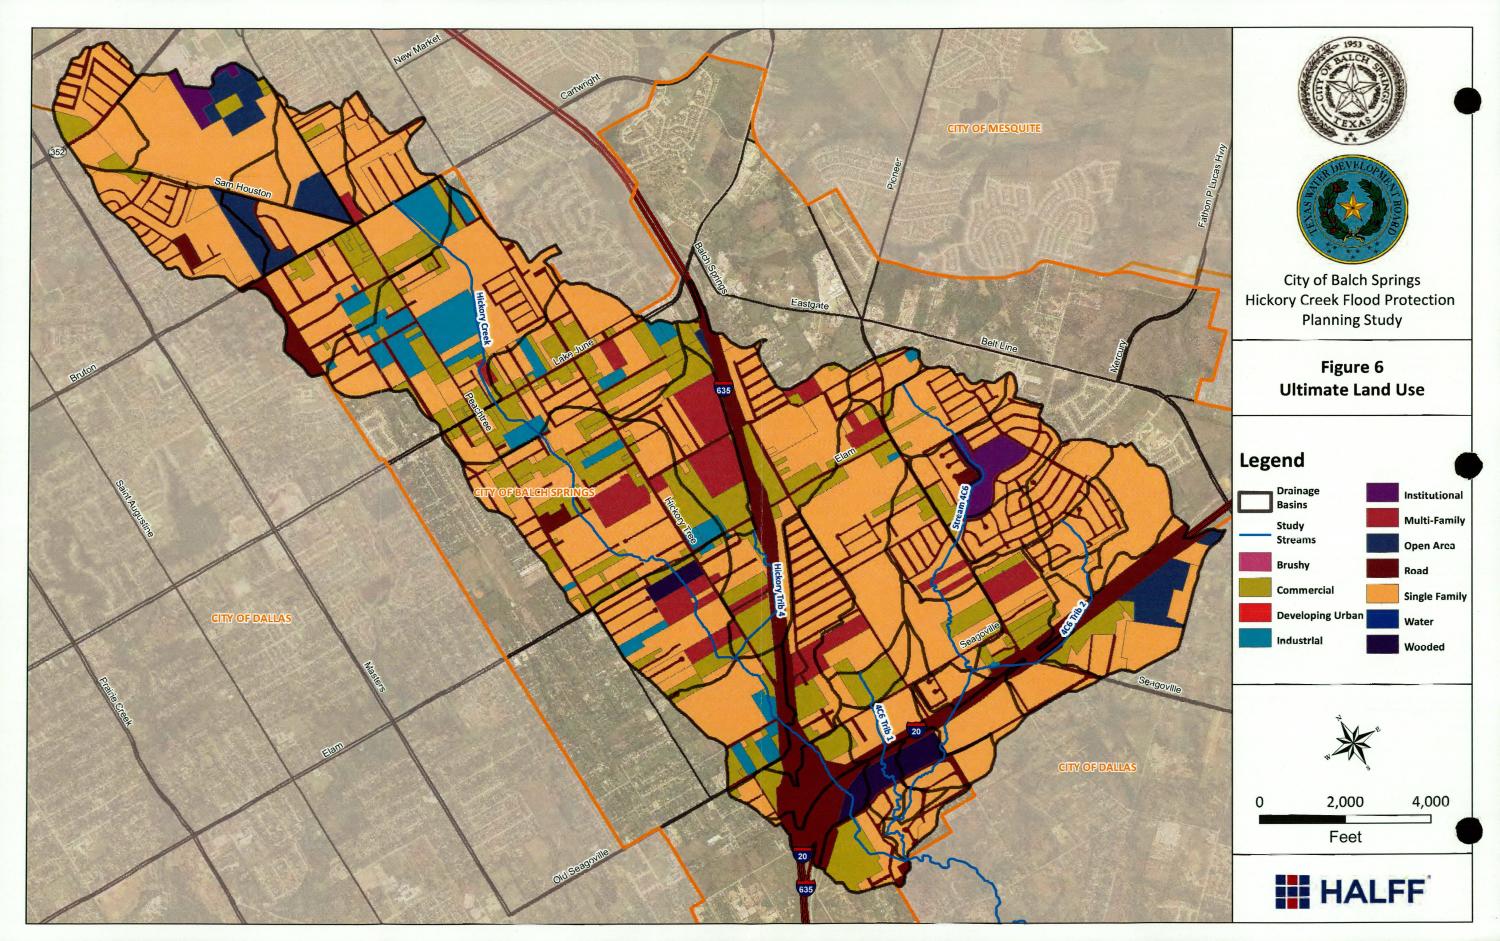 City of Balch Springs Hickory Creek Flood Protection Planning Study Final Report
                                                
                                                    Figure 6
                                                